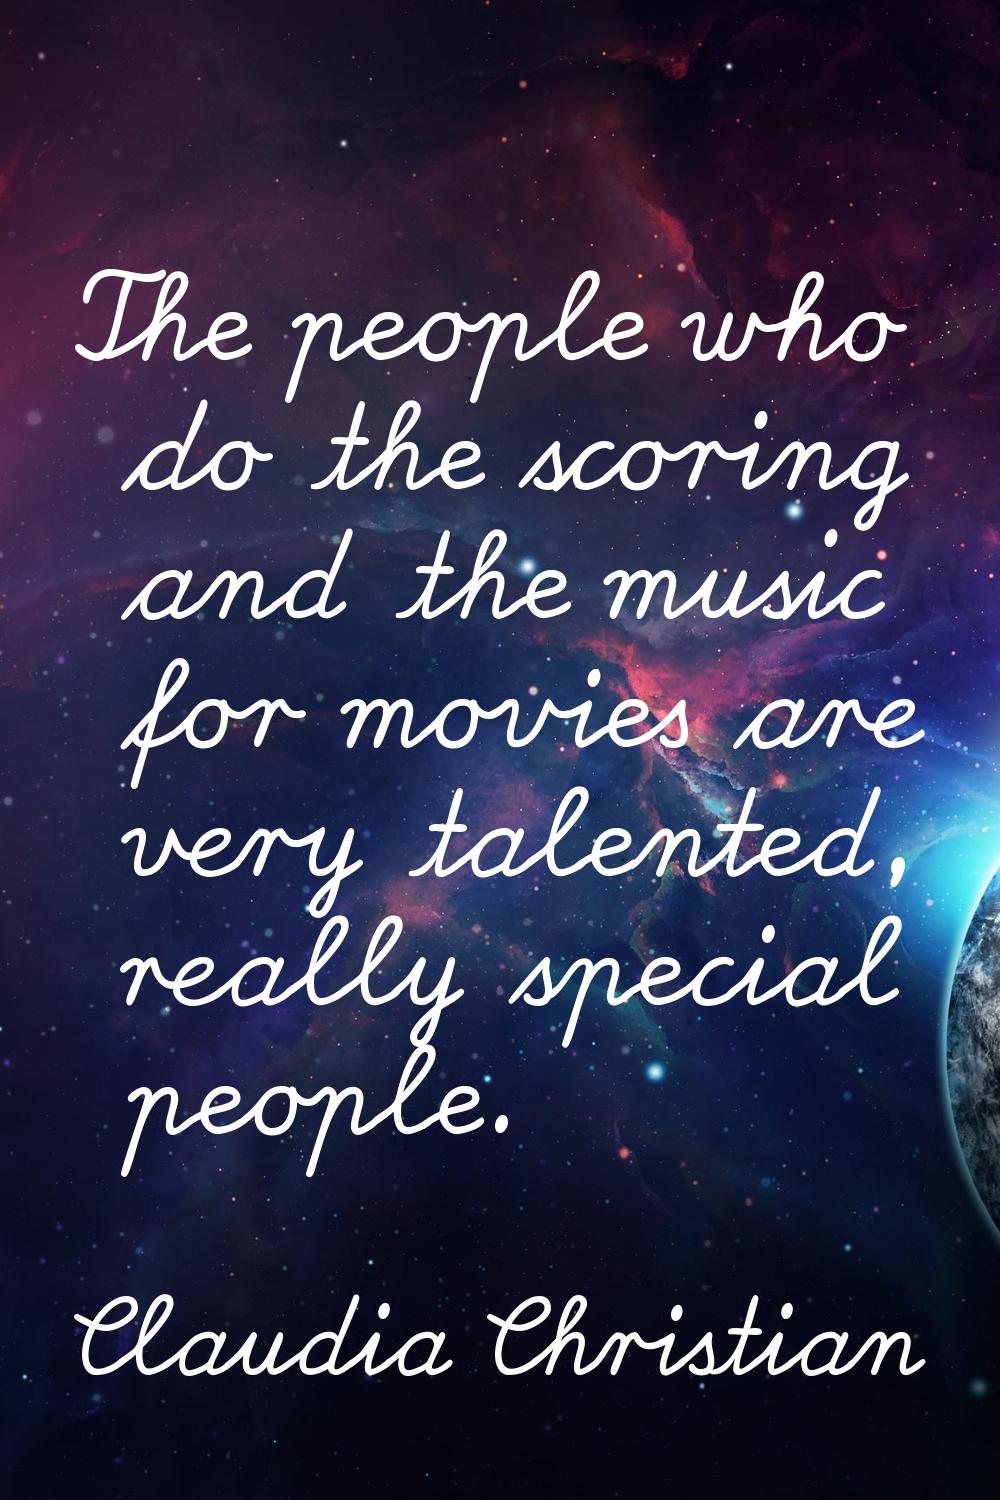 The people who do the scoring and the music for movies are very talented, really special people.